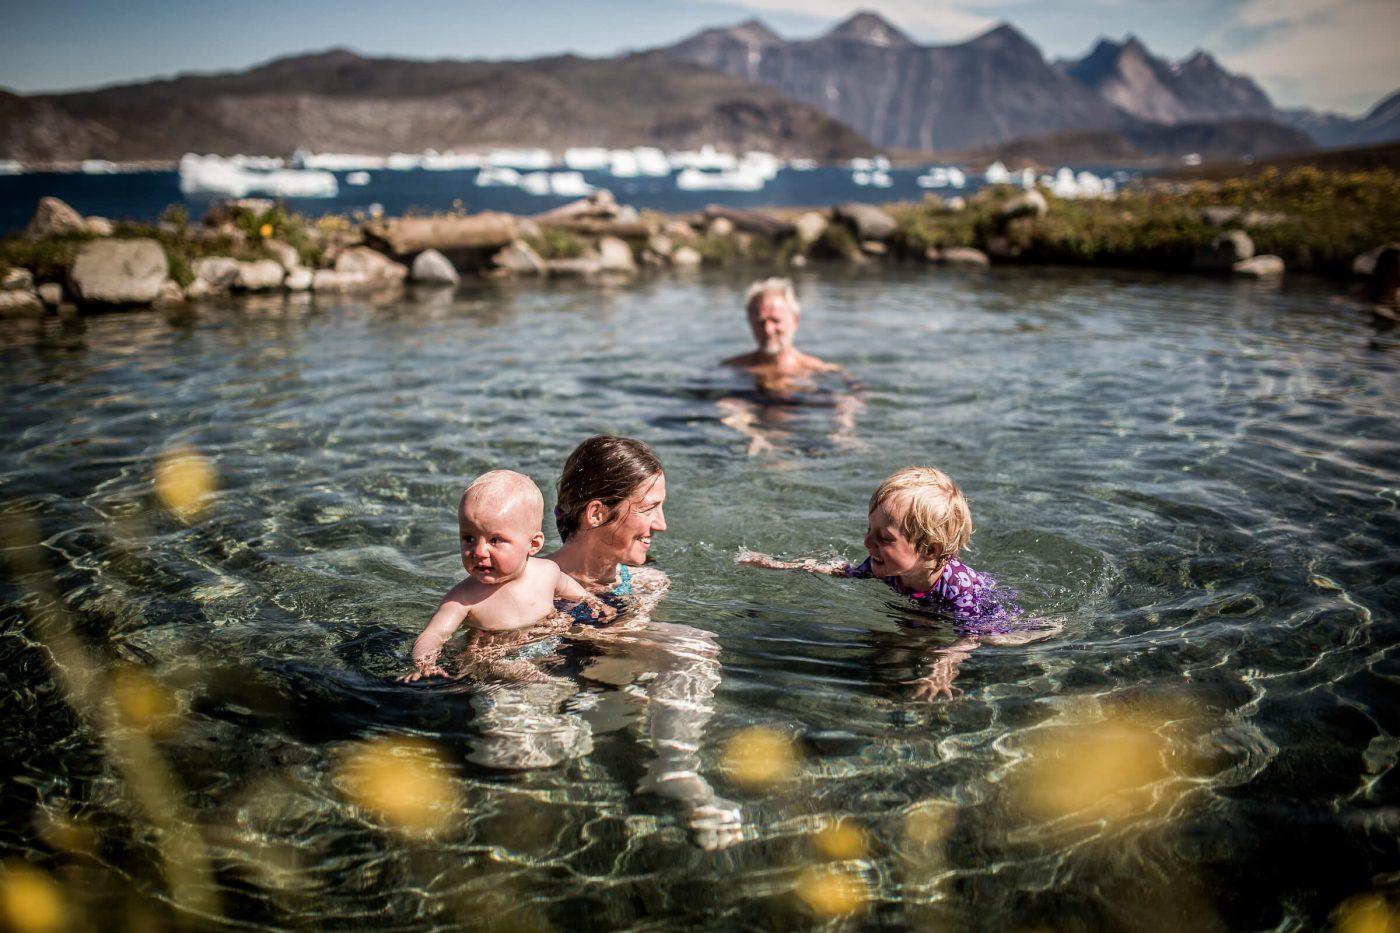 A family swimming in the Uunartoq hot springs in South Greenland, by Mads Pihl